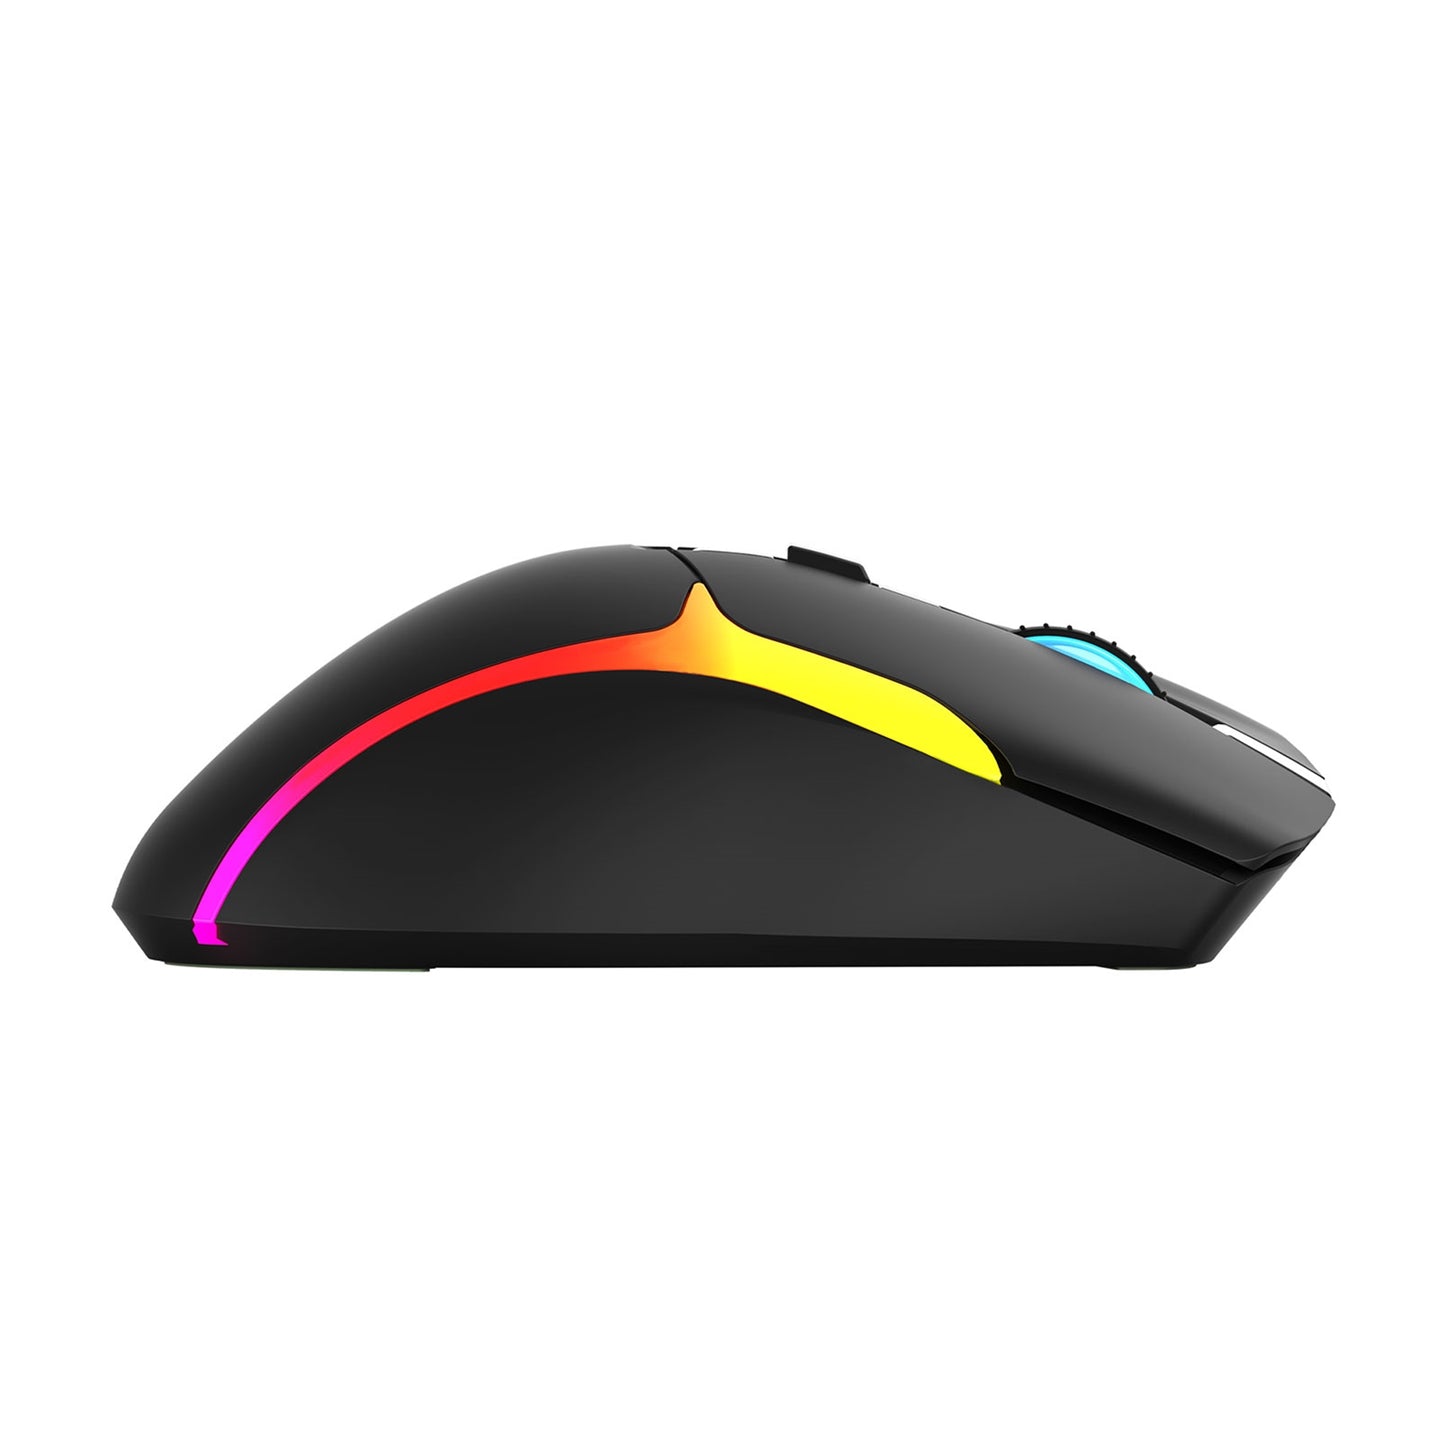 Marvo Scorpion M729W Rechargeable RGB Wireless Gaming Mouse, Optical Sensor with 7 Buttons